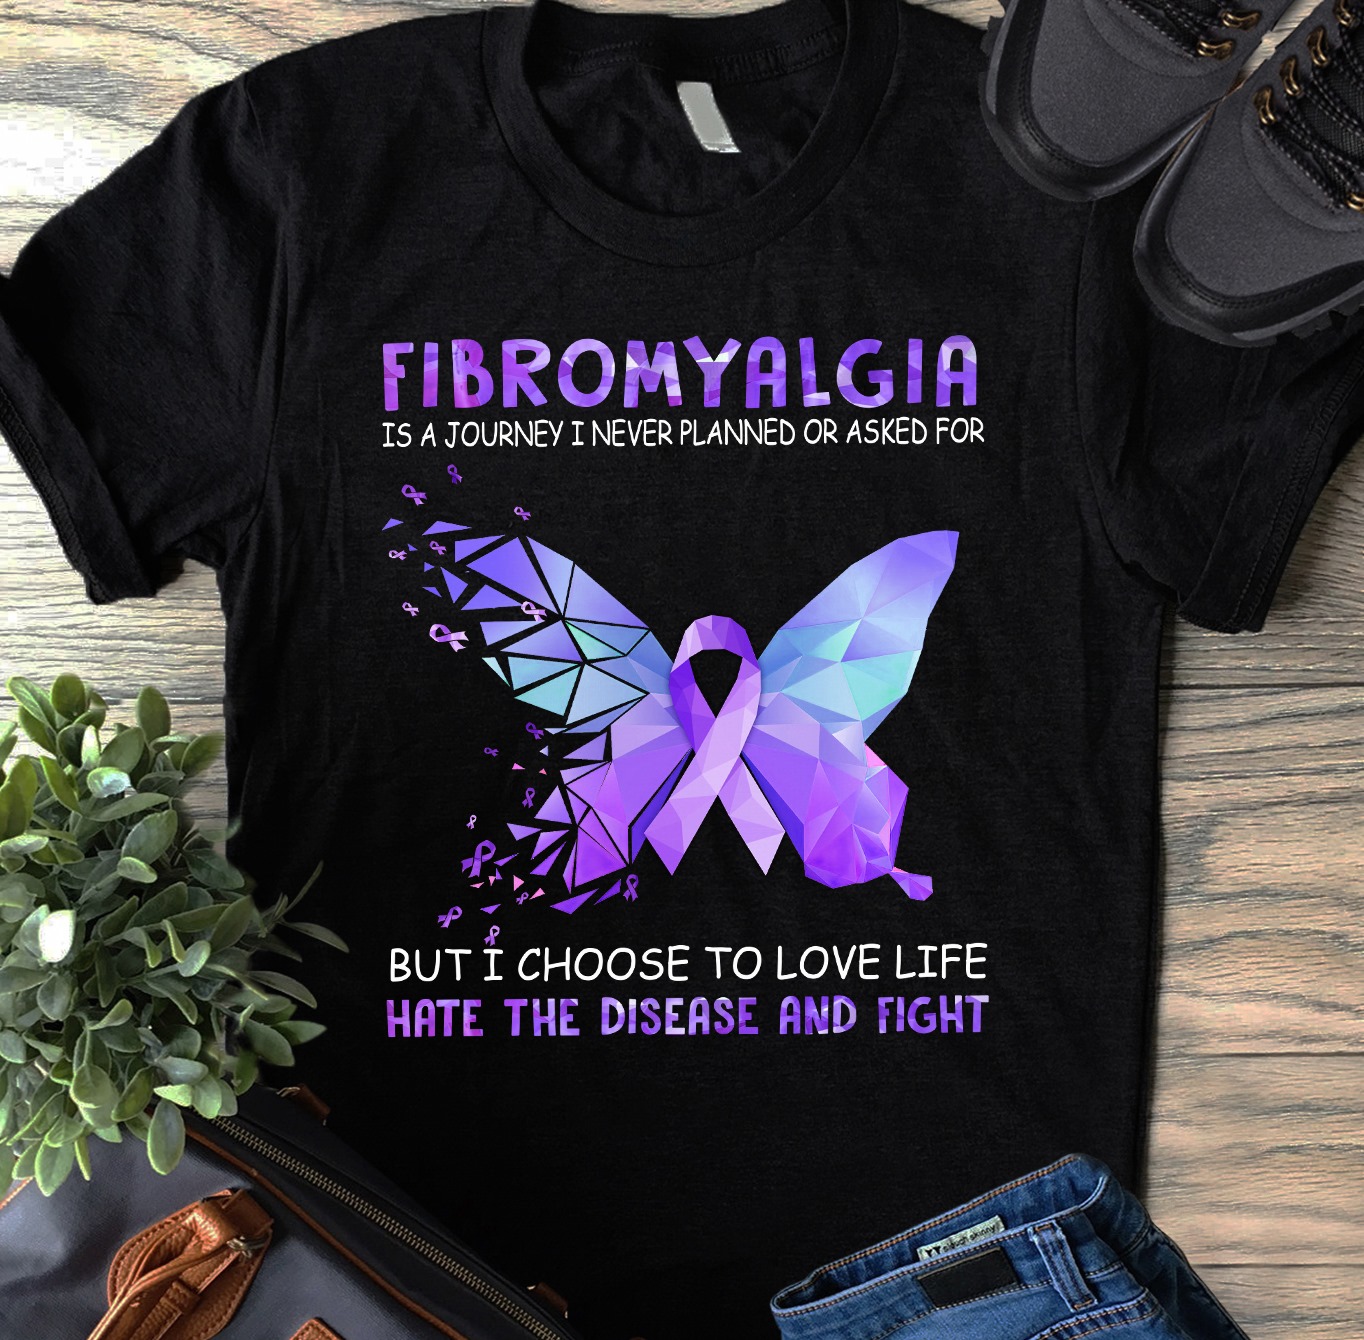 Fibromyalgia is a journey I never planned or asked for but I choose to love life - Fibromyalgia awareness